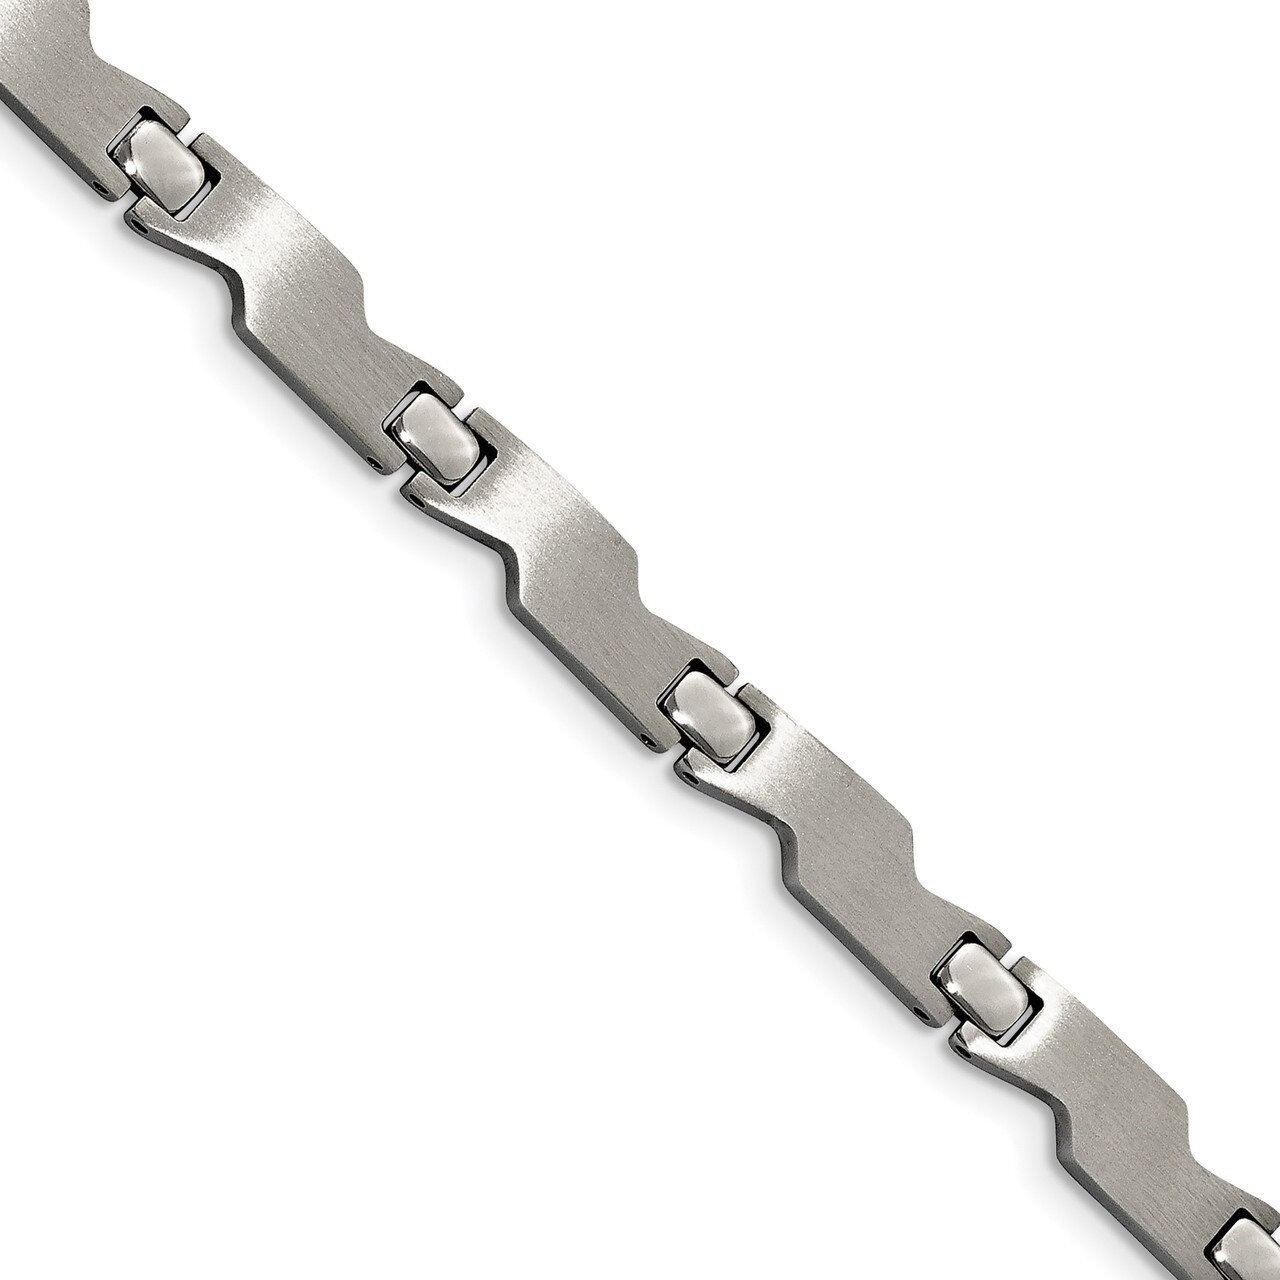 8 Inch Bracelet Stainless Steel Brushed and Polished SRB1673-7.75